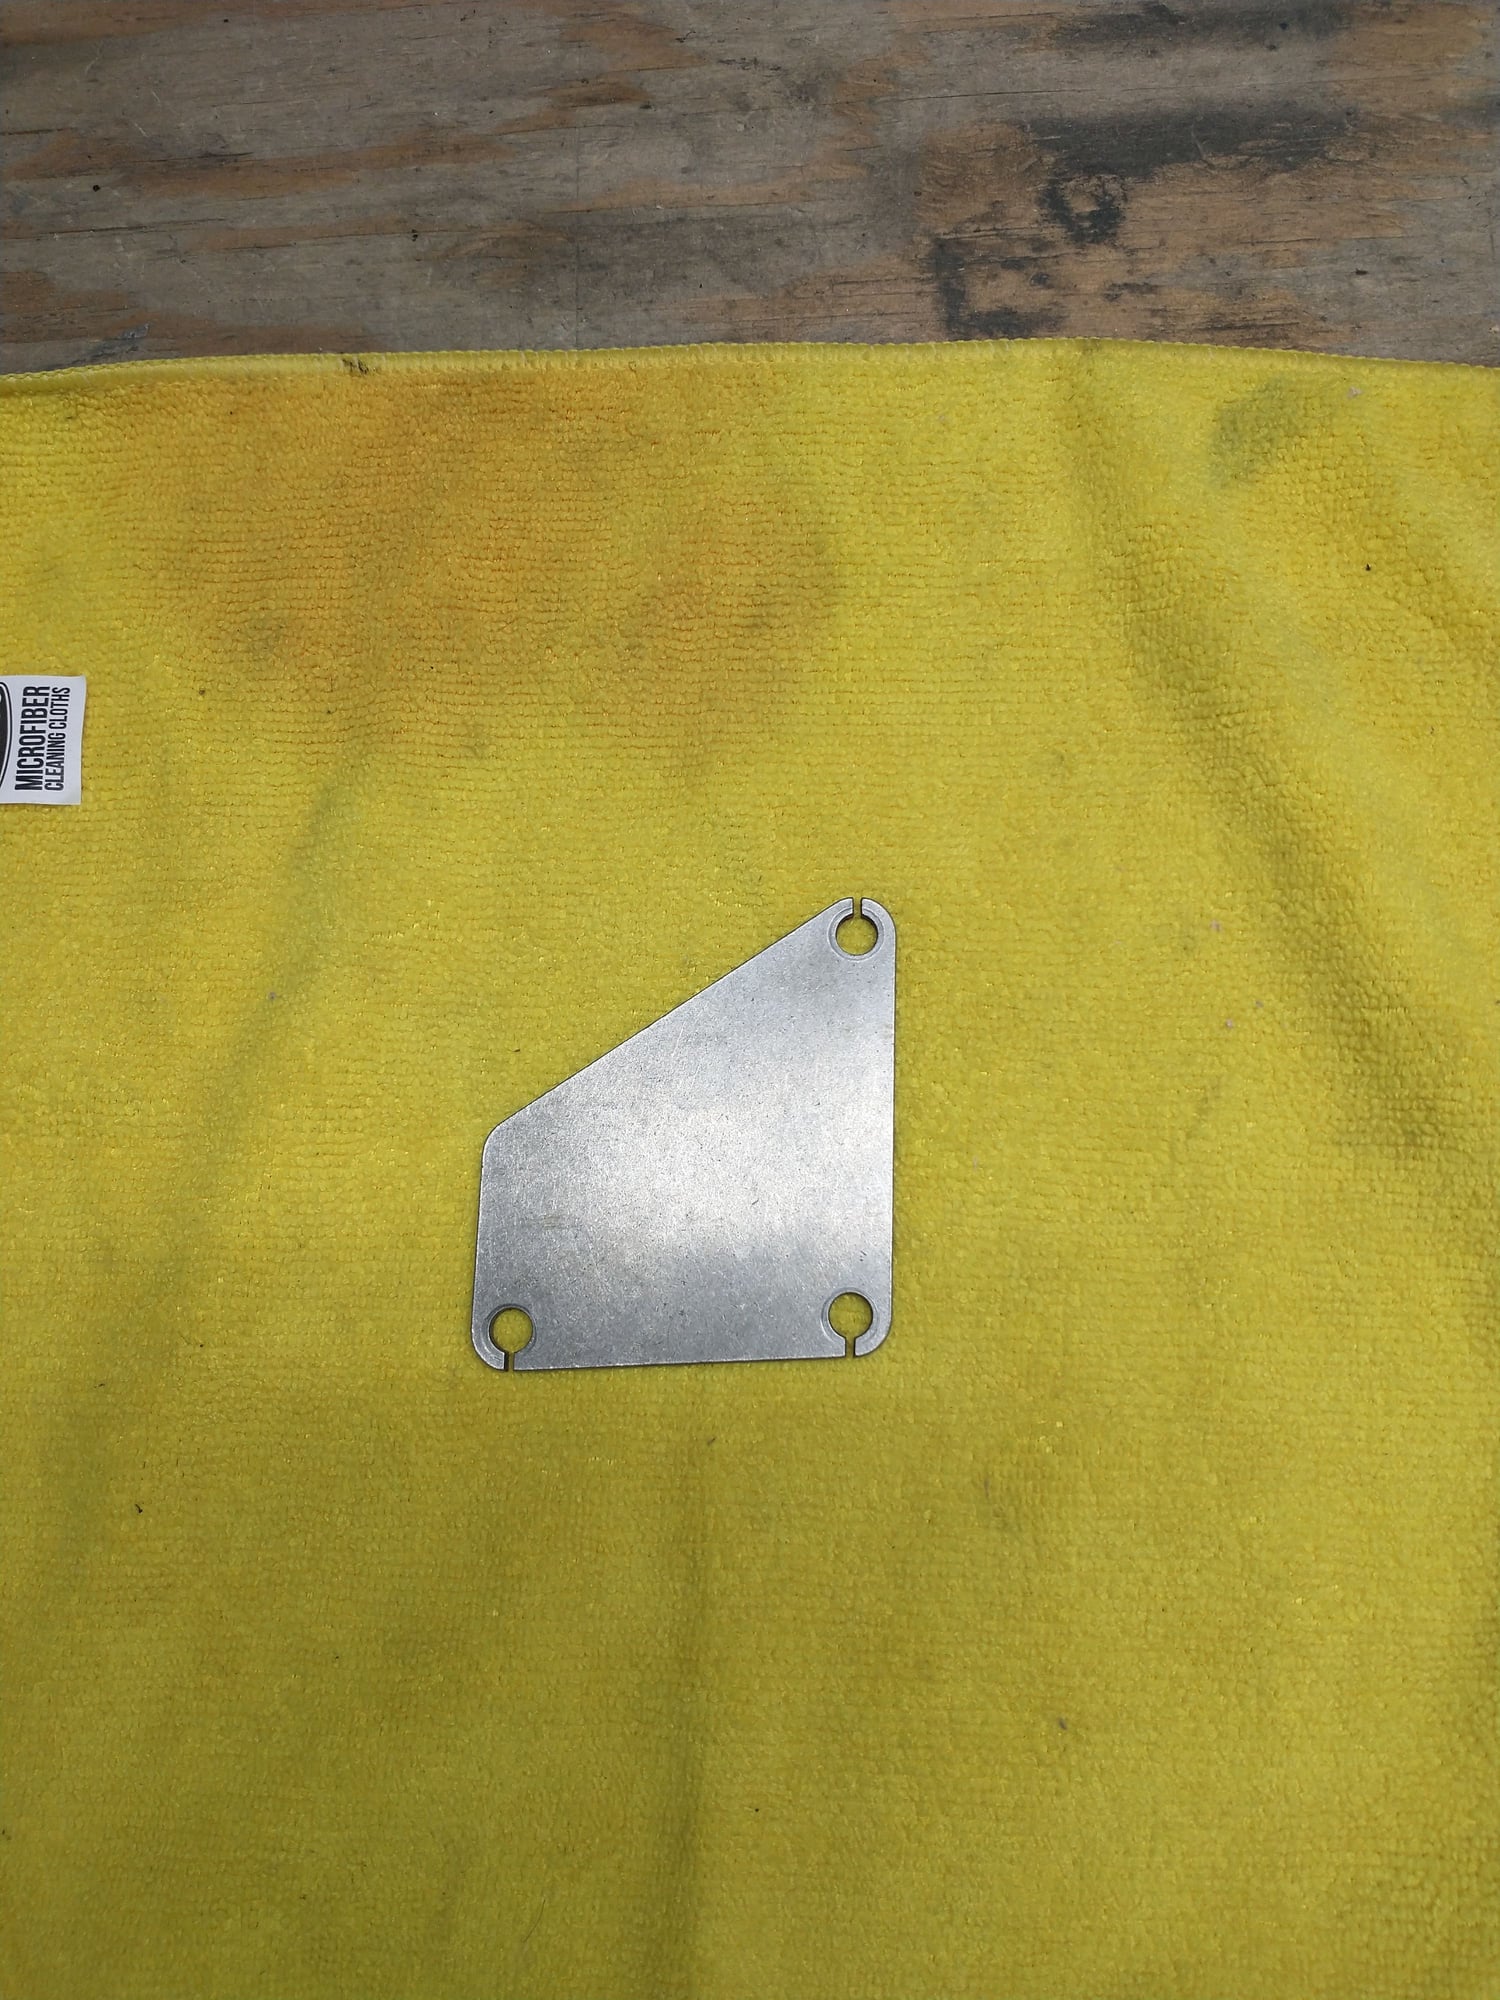 Miscellaneous - FD OMP Block-Off Plate - Used - 0  All Models - Elkton, MD 21921, United States